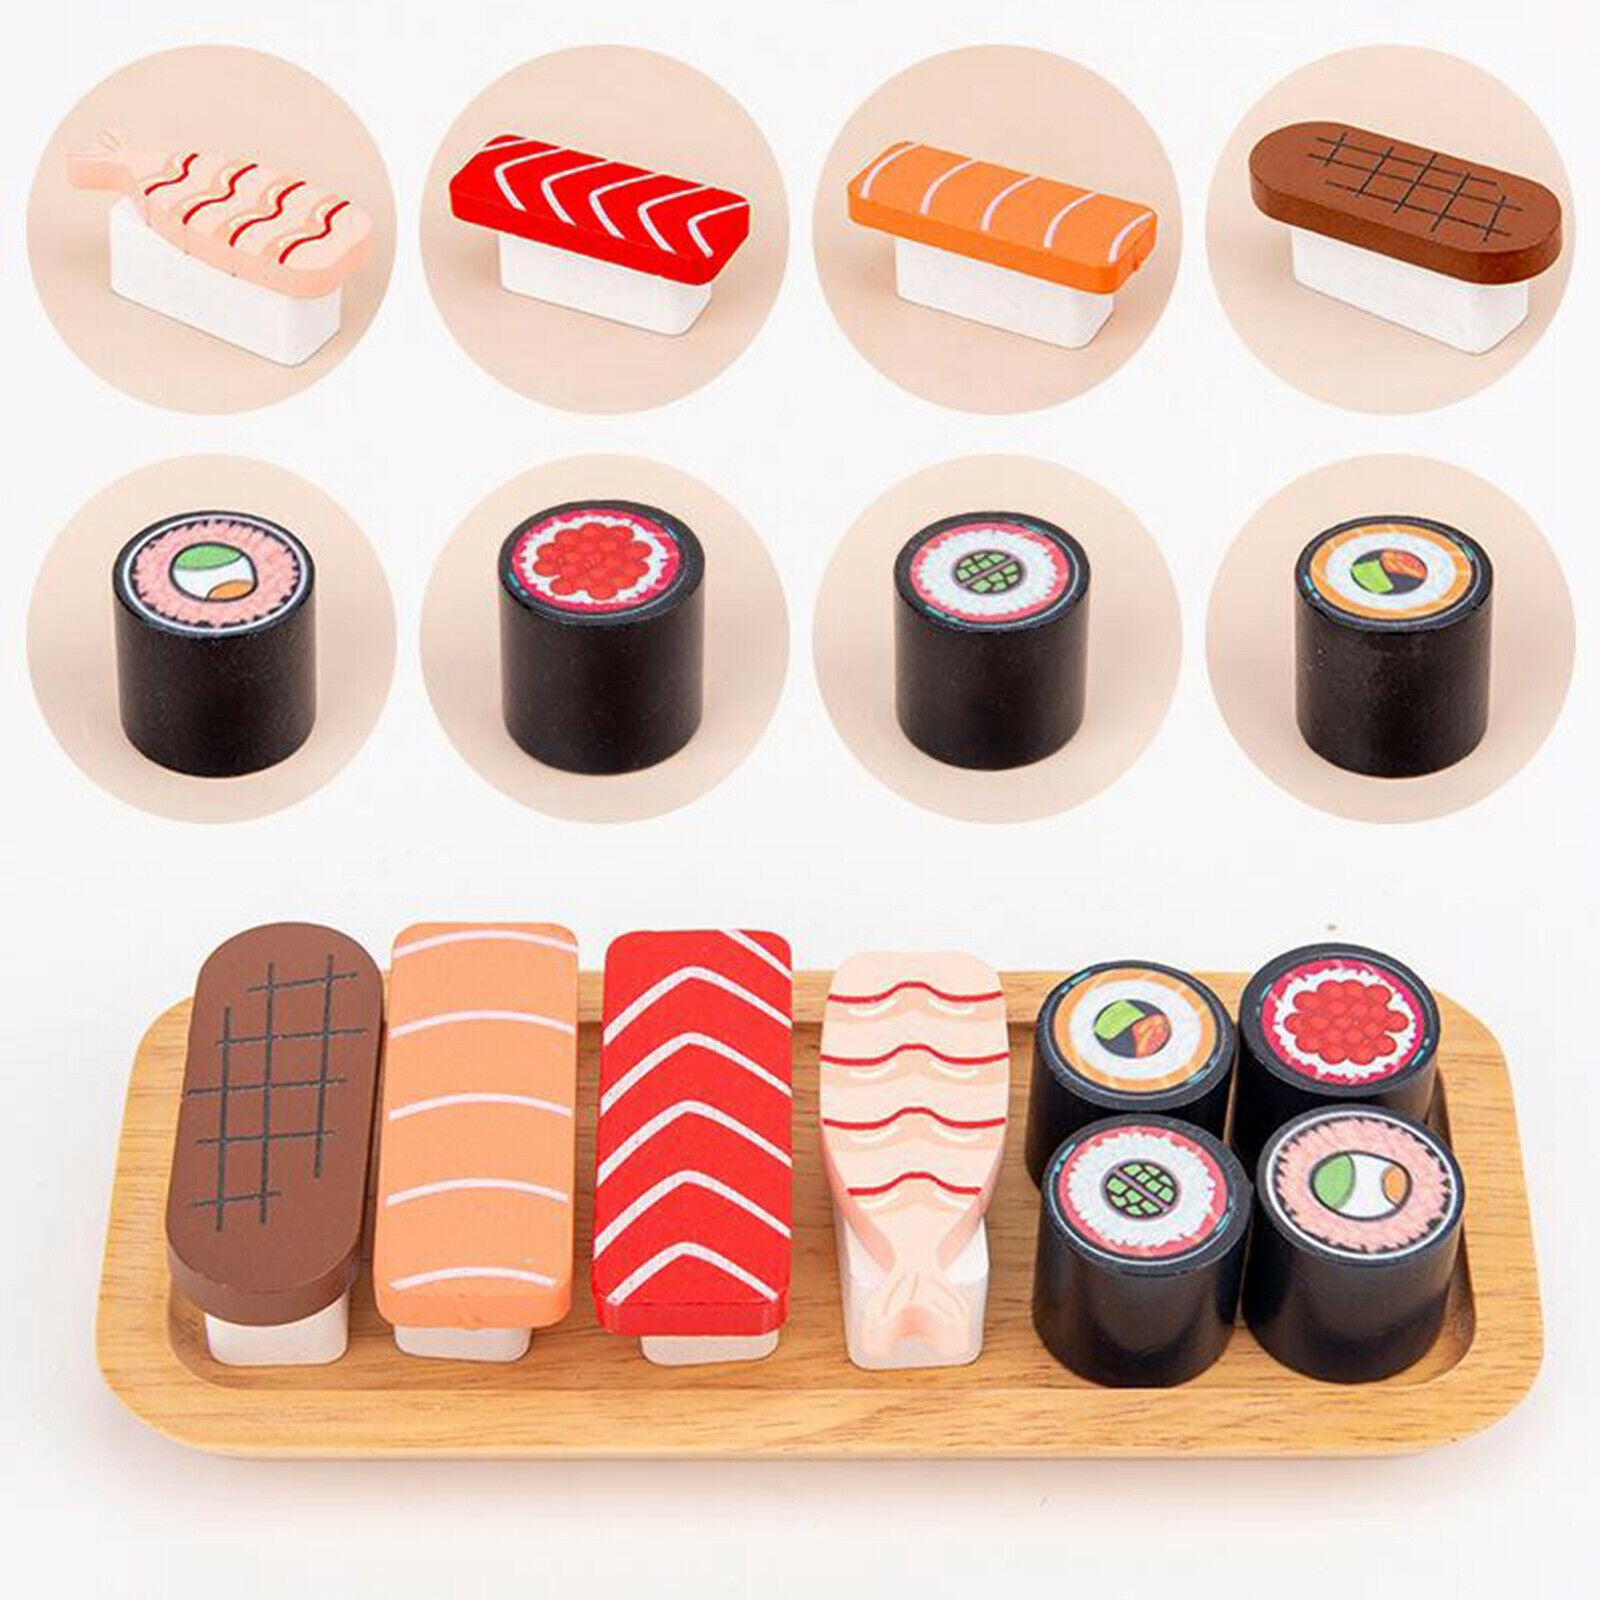 Educational Wooden Toys Sushi Set Gift Box Children Cooking Role Play